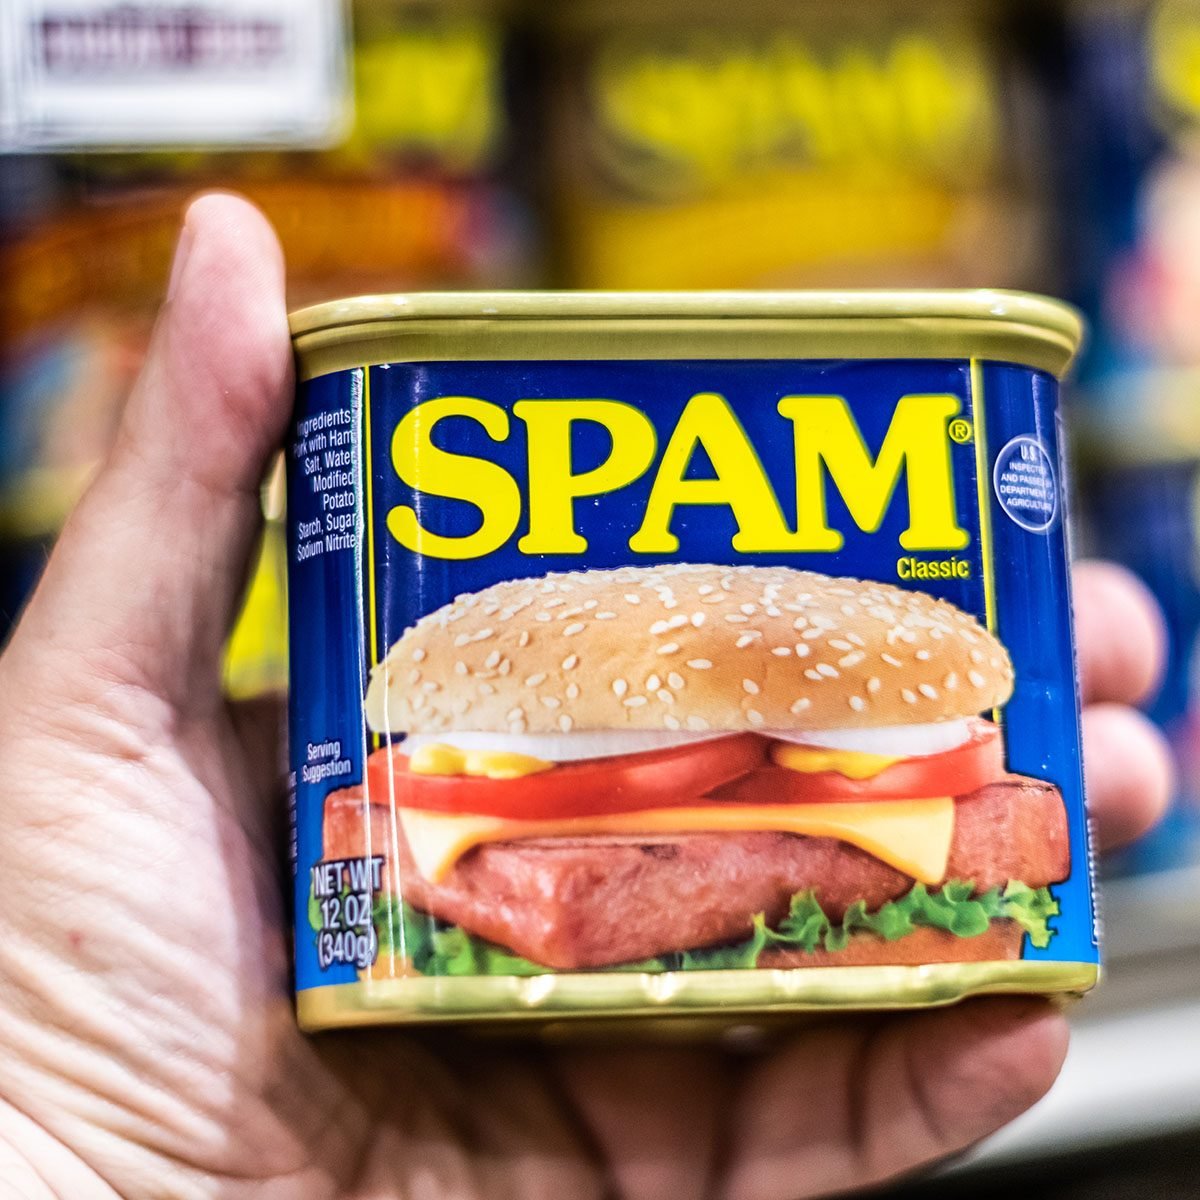 shoppers hand holding a can of SPAM brand canned meat